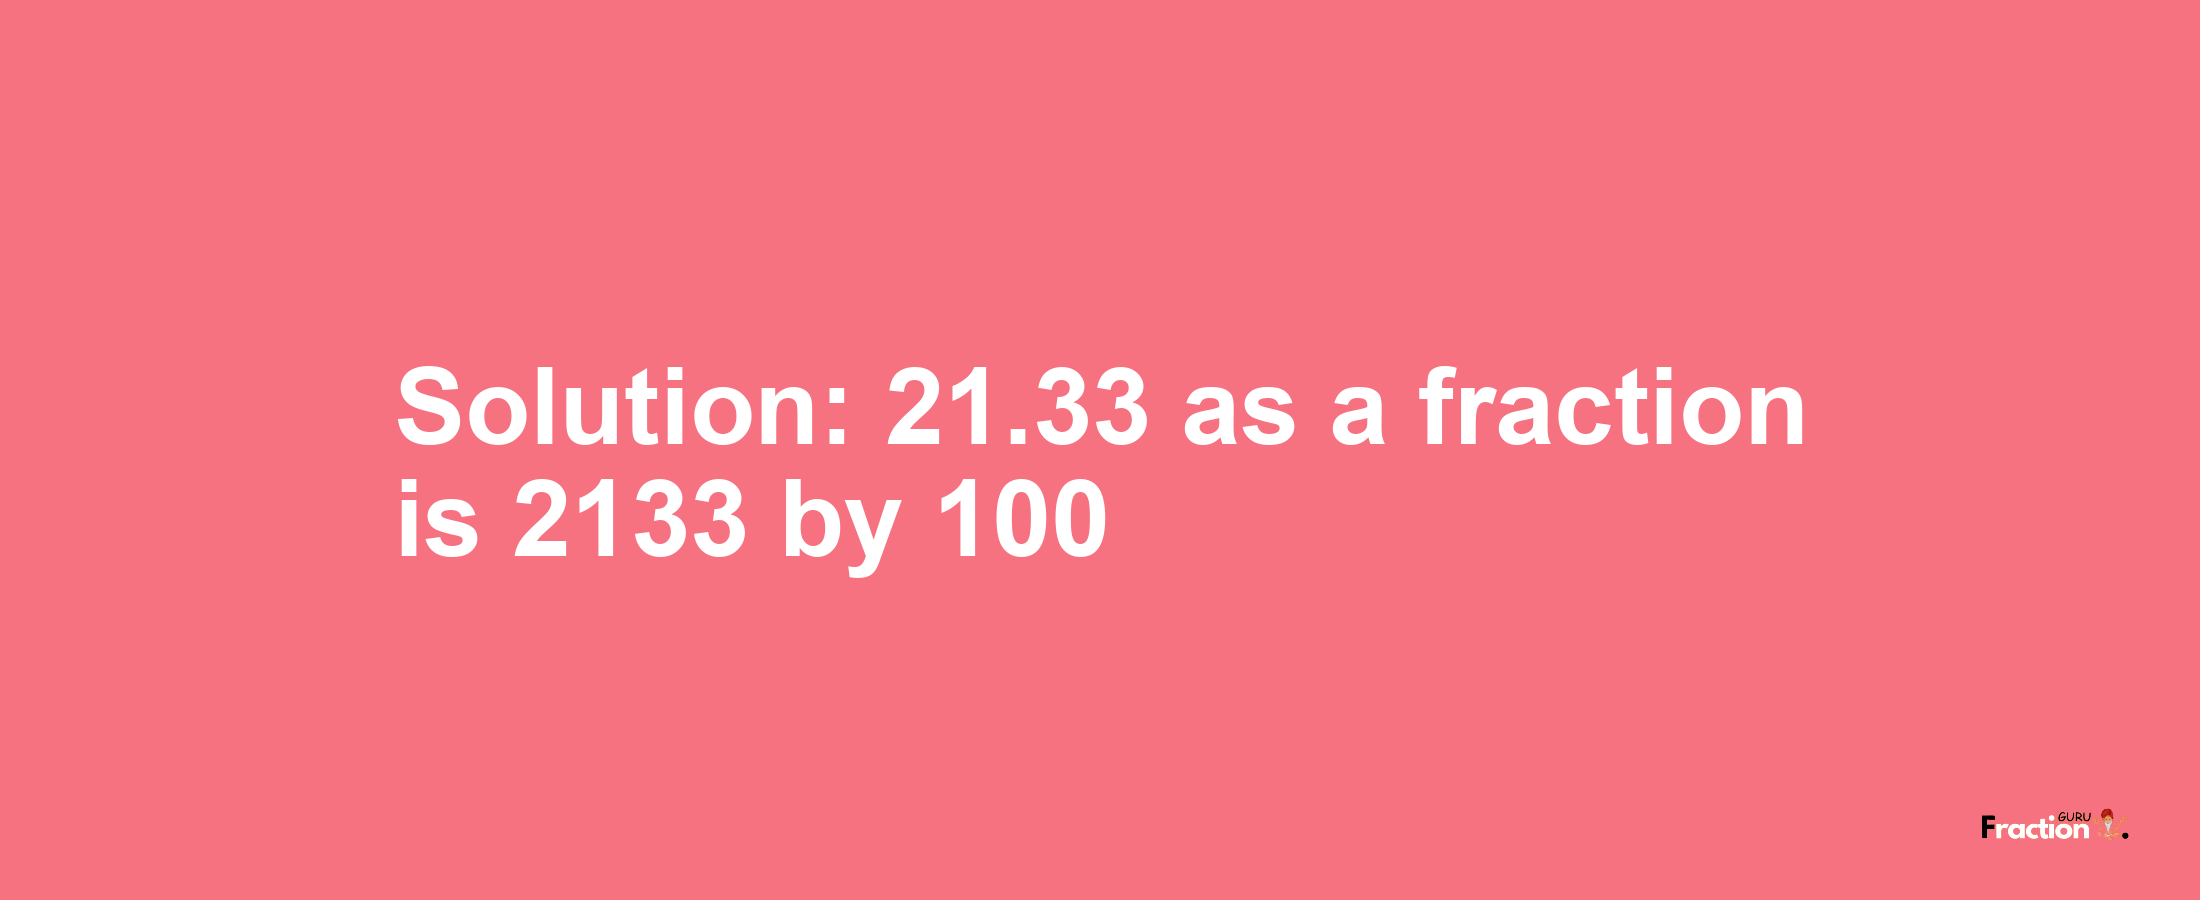 Solution:21.33 as a fraction is 2133/100